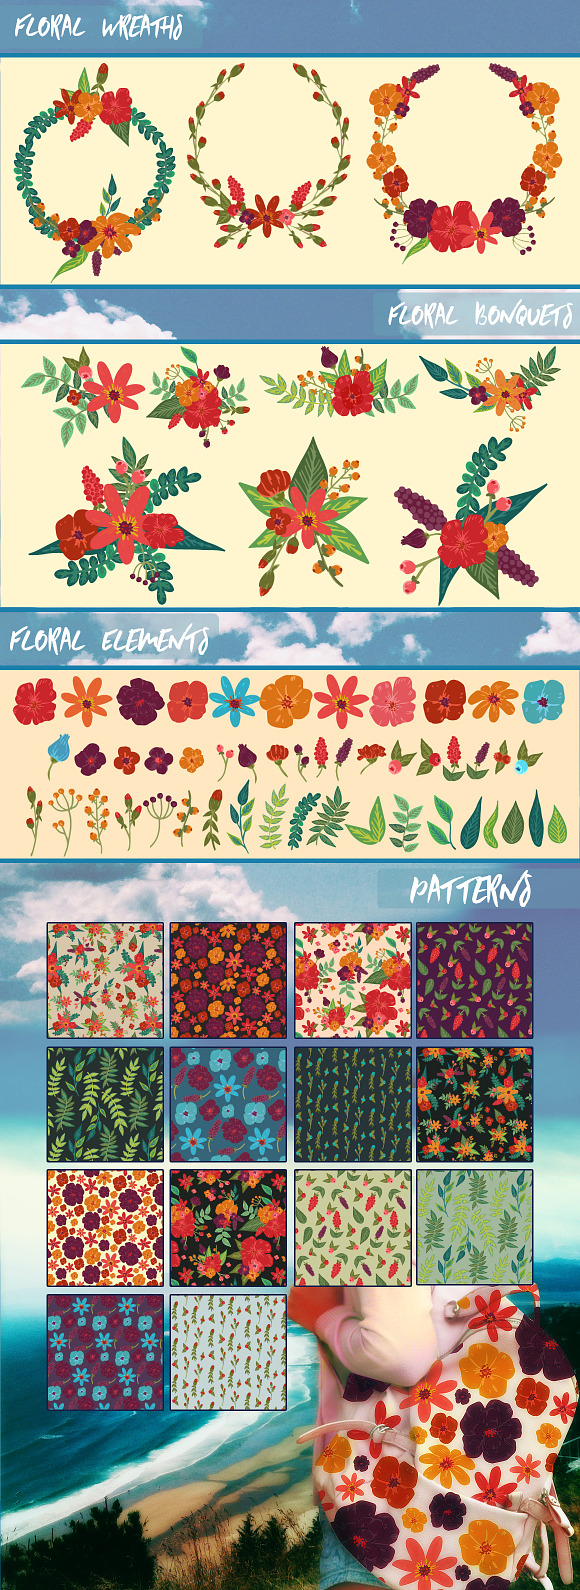 Floral Elements, Bundles, & Patterns in Patterns - product preview 1